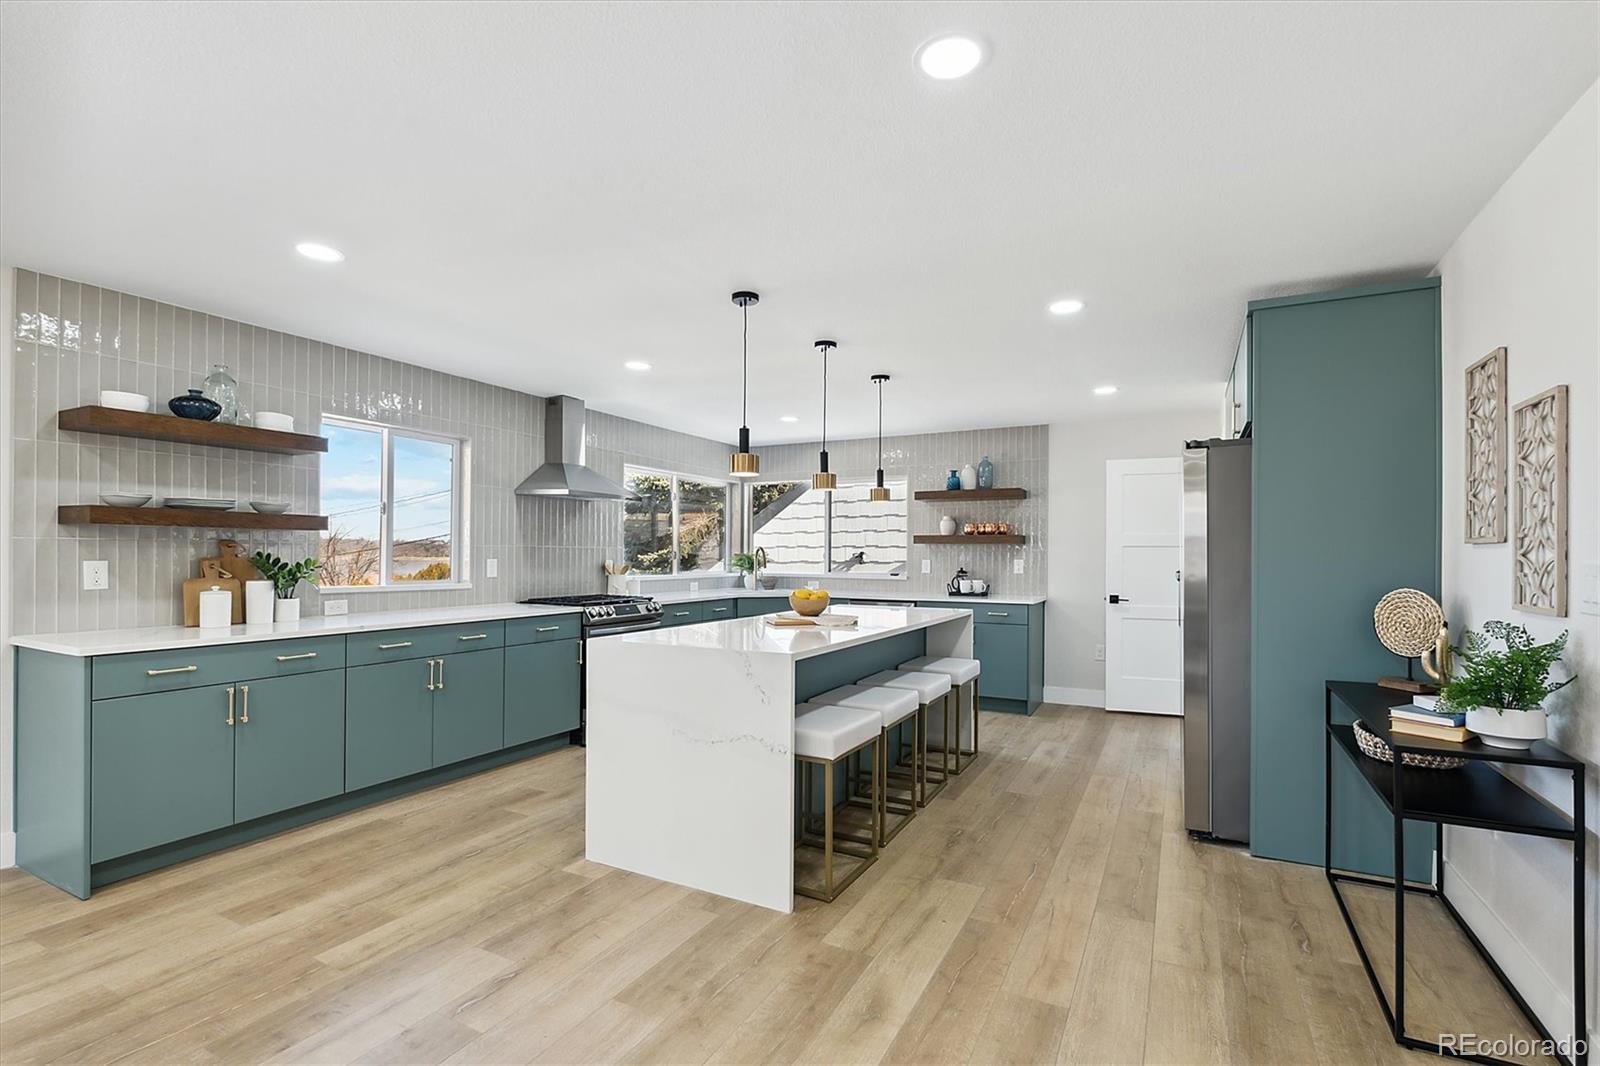 a kitchen with stainless steel appliances kitchen island wooden cabinets and center island